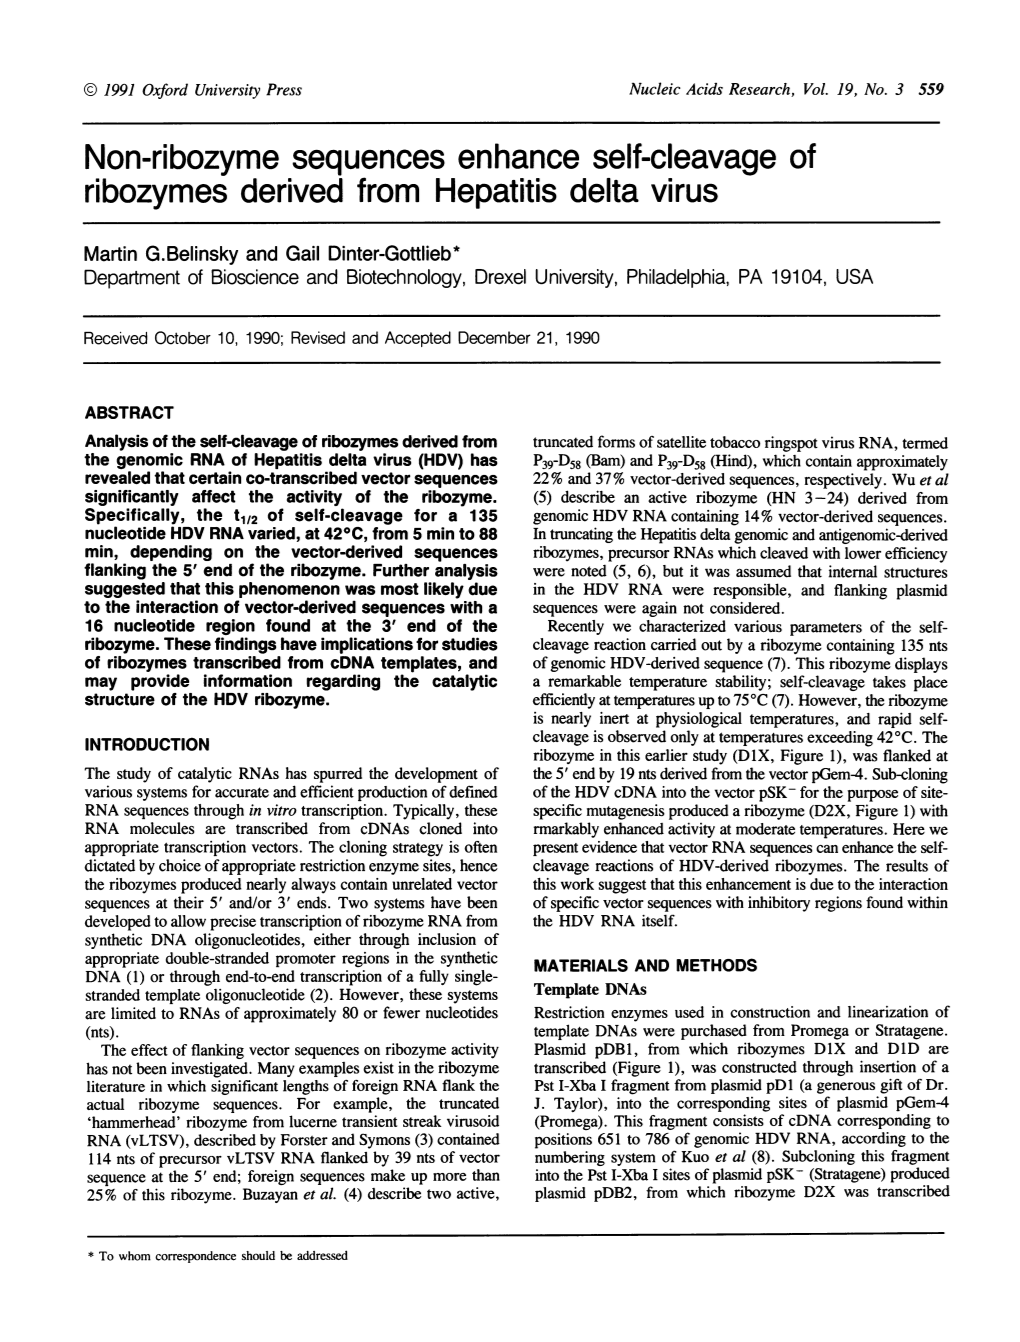 Ribozymes Derived from Hepatitis Delta Virus